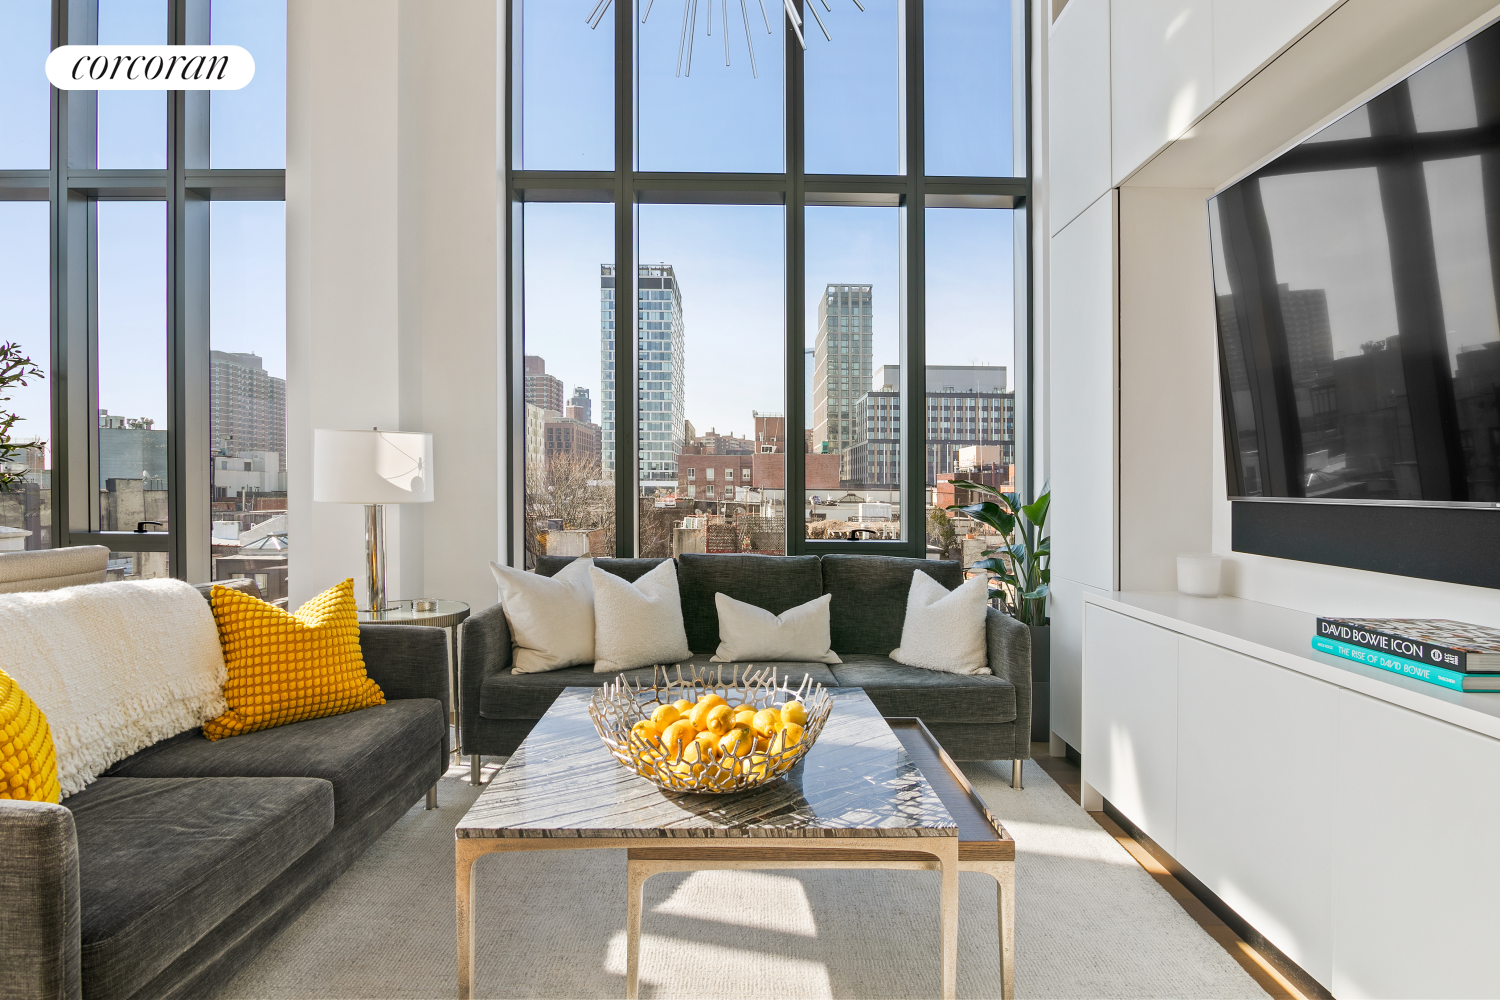 150 Rivington Street Phc, Lower East Side, Downtown, NYC - 3 Bedrooms  
3 Bathrooms  
5 Rooms - 